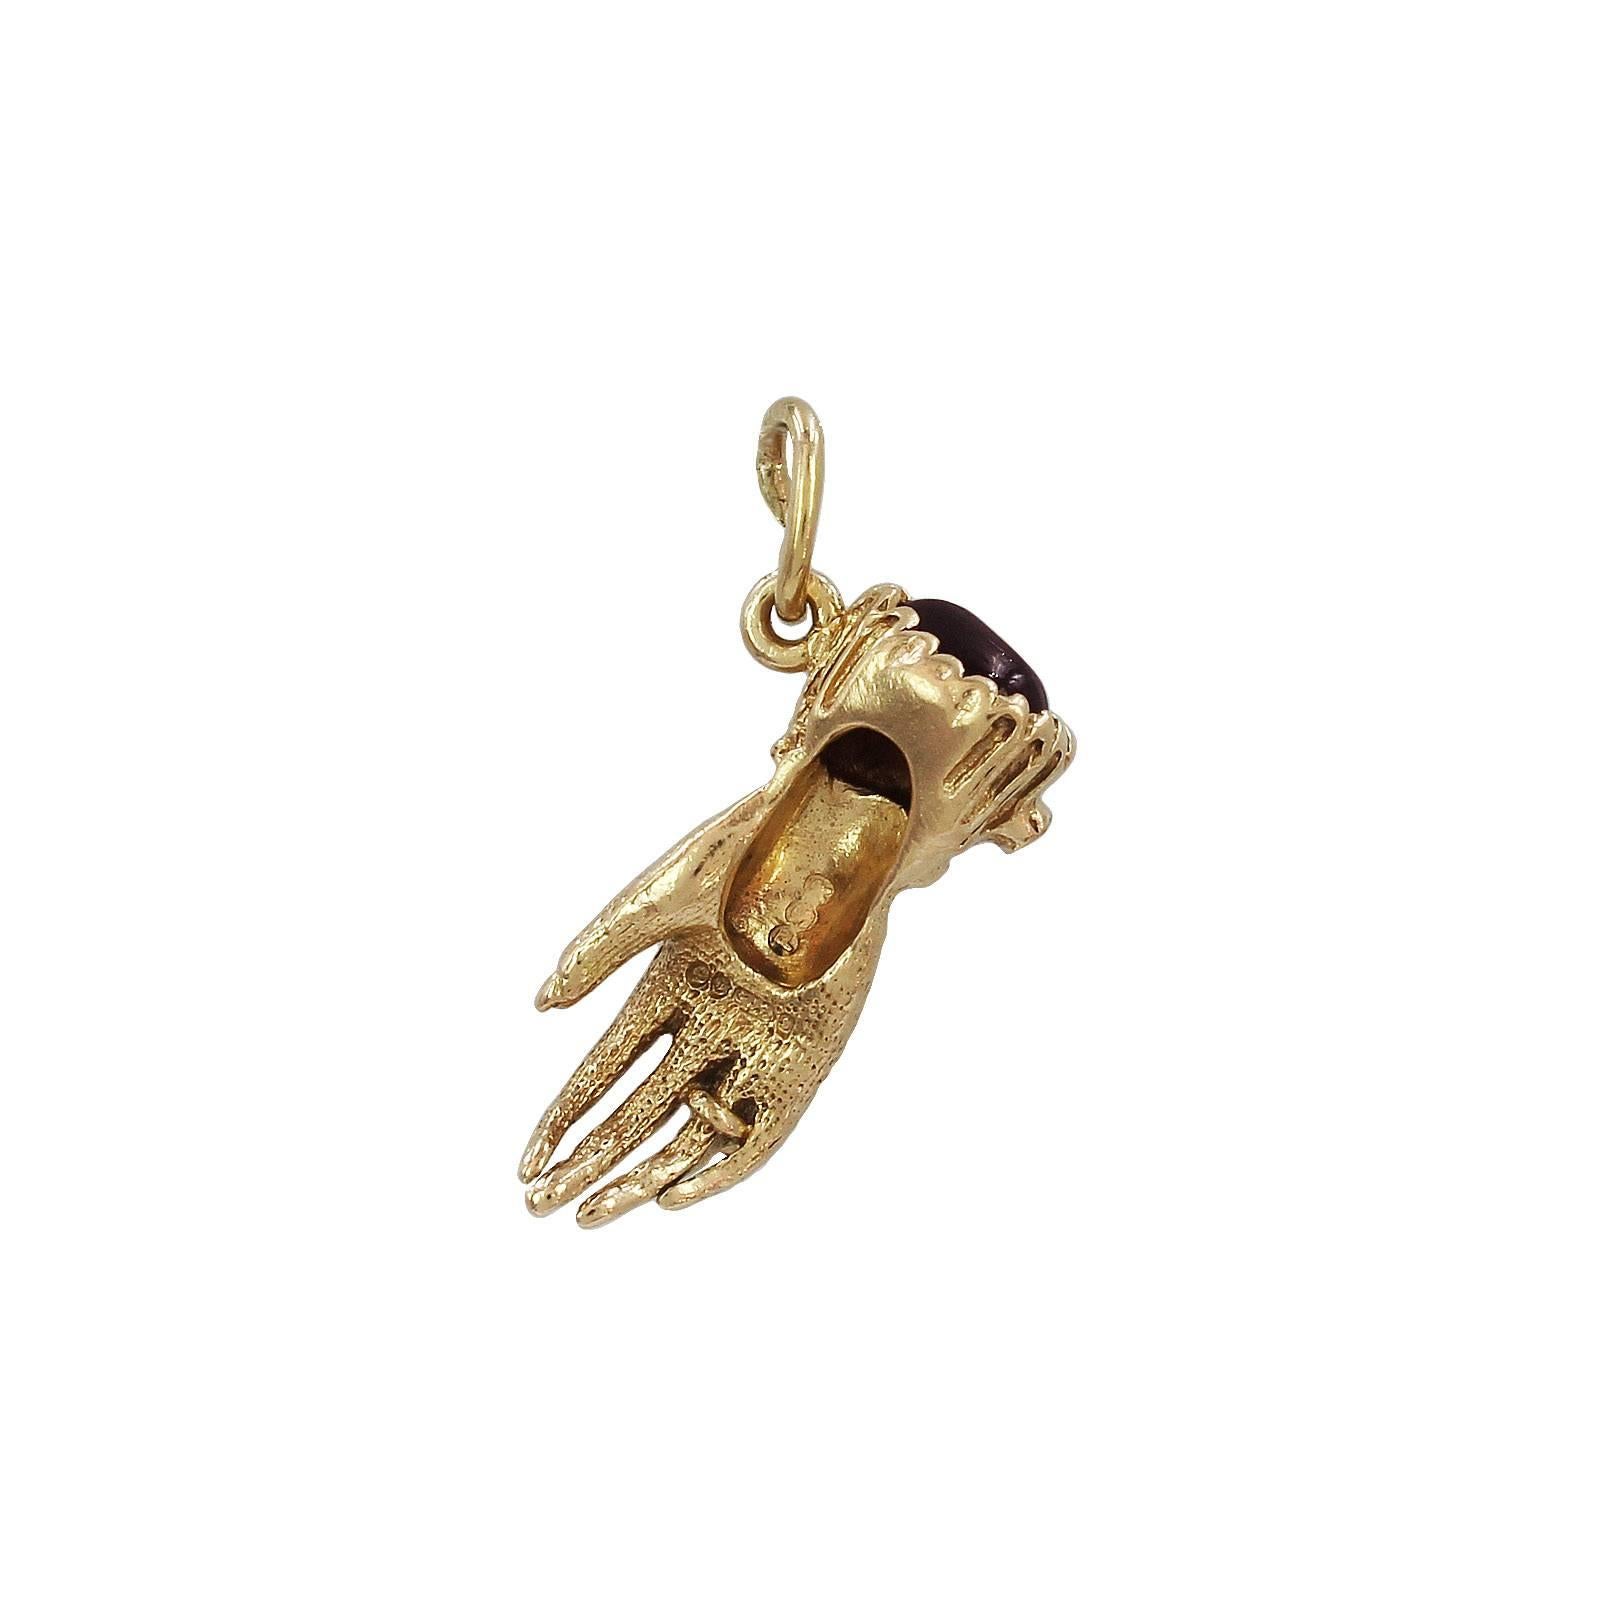 A 9k gold figa gem set pendant. In the form of a hand wearing a ring, with frilled cuff set with a blue gem and a red gem cabochon to the terminal. Hallmark for London, 1974. Length 2.2cms. Weight 2.9gms.